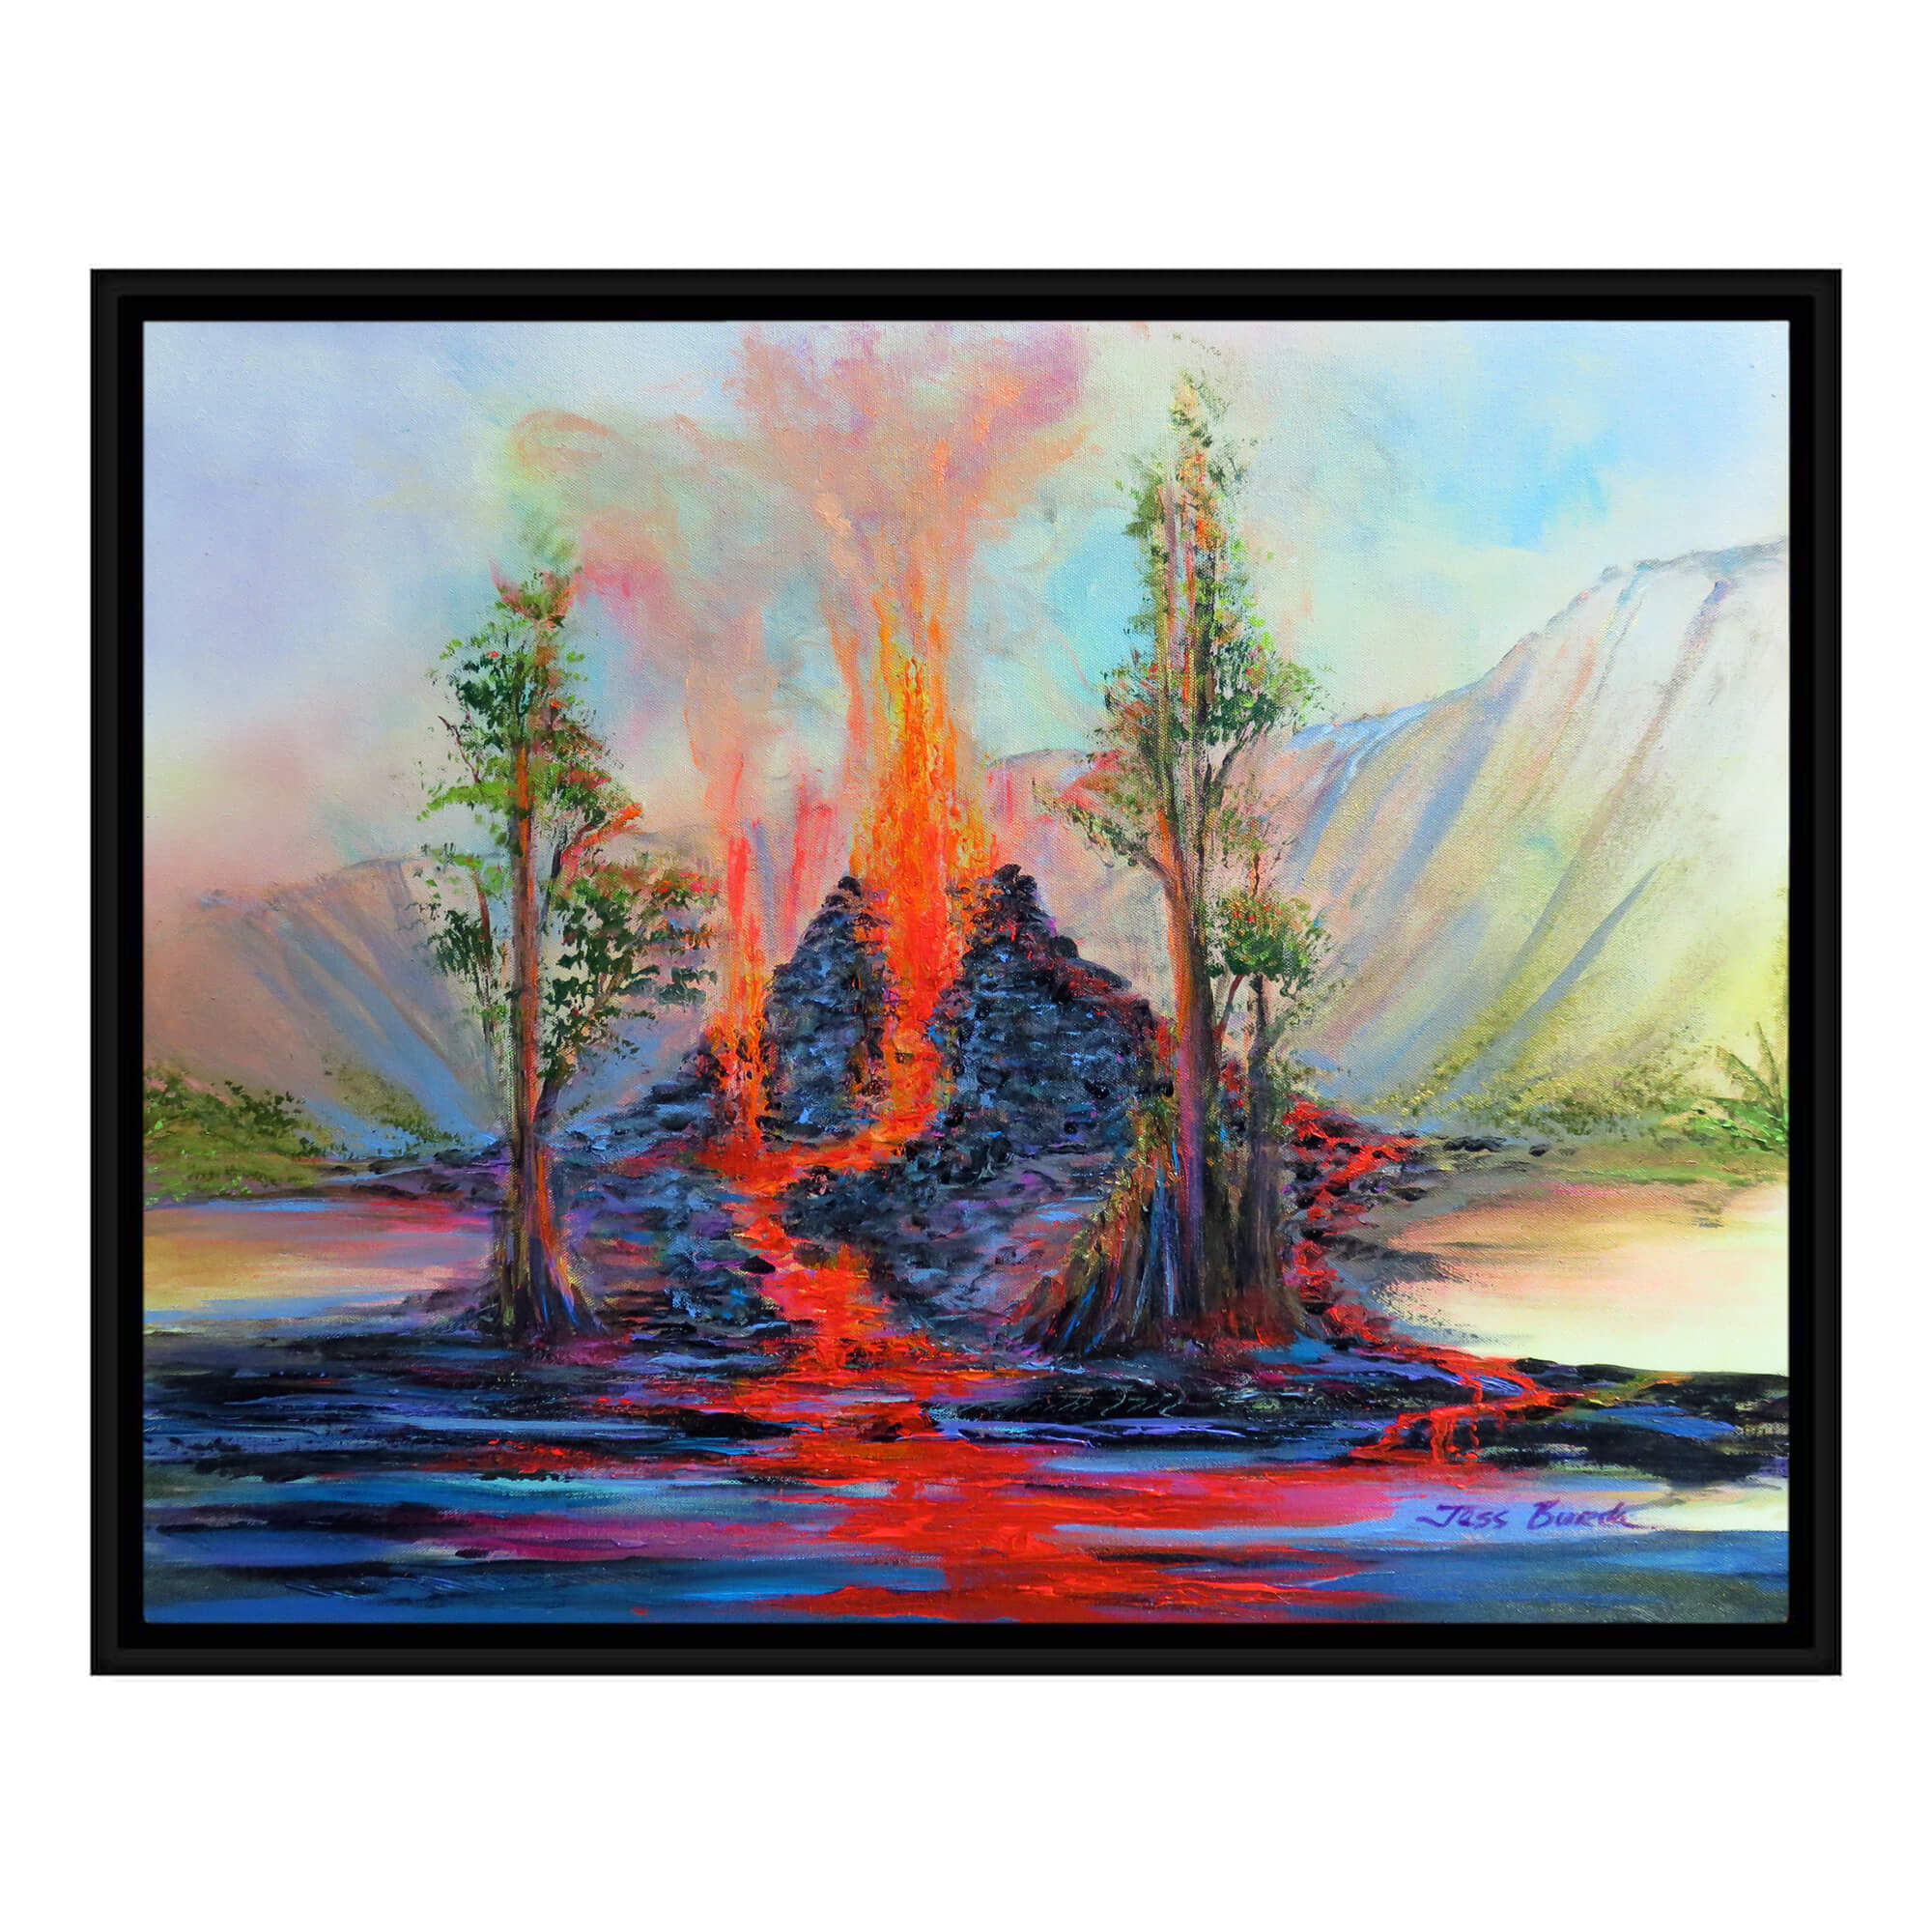 A vibrant cinder cone with flowing lava by Hawaii artist Jess Burda